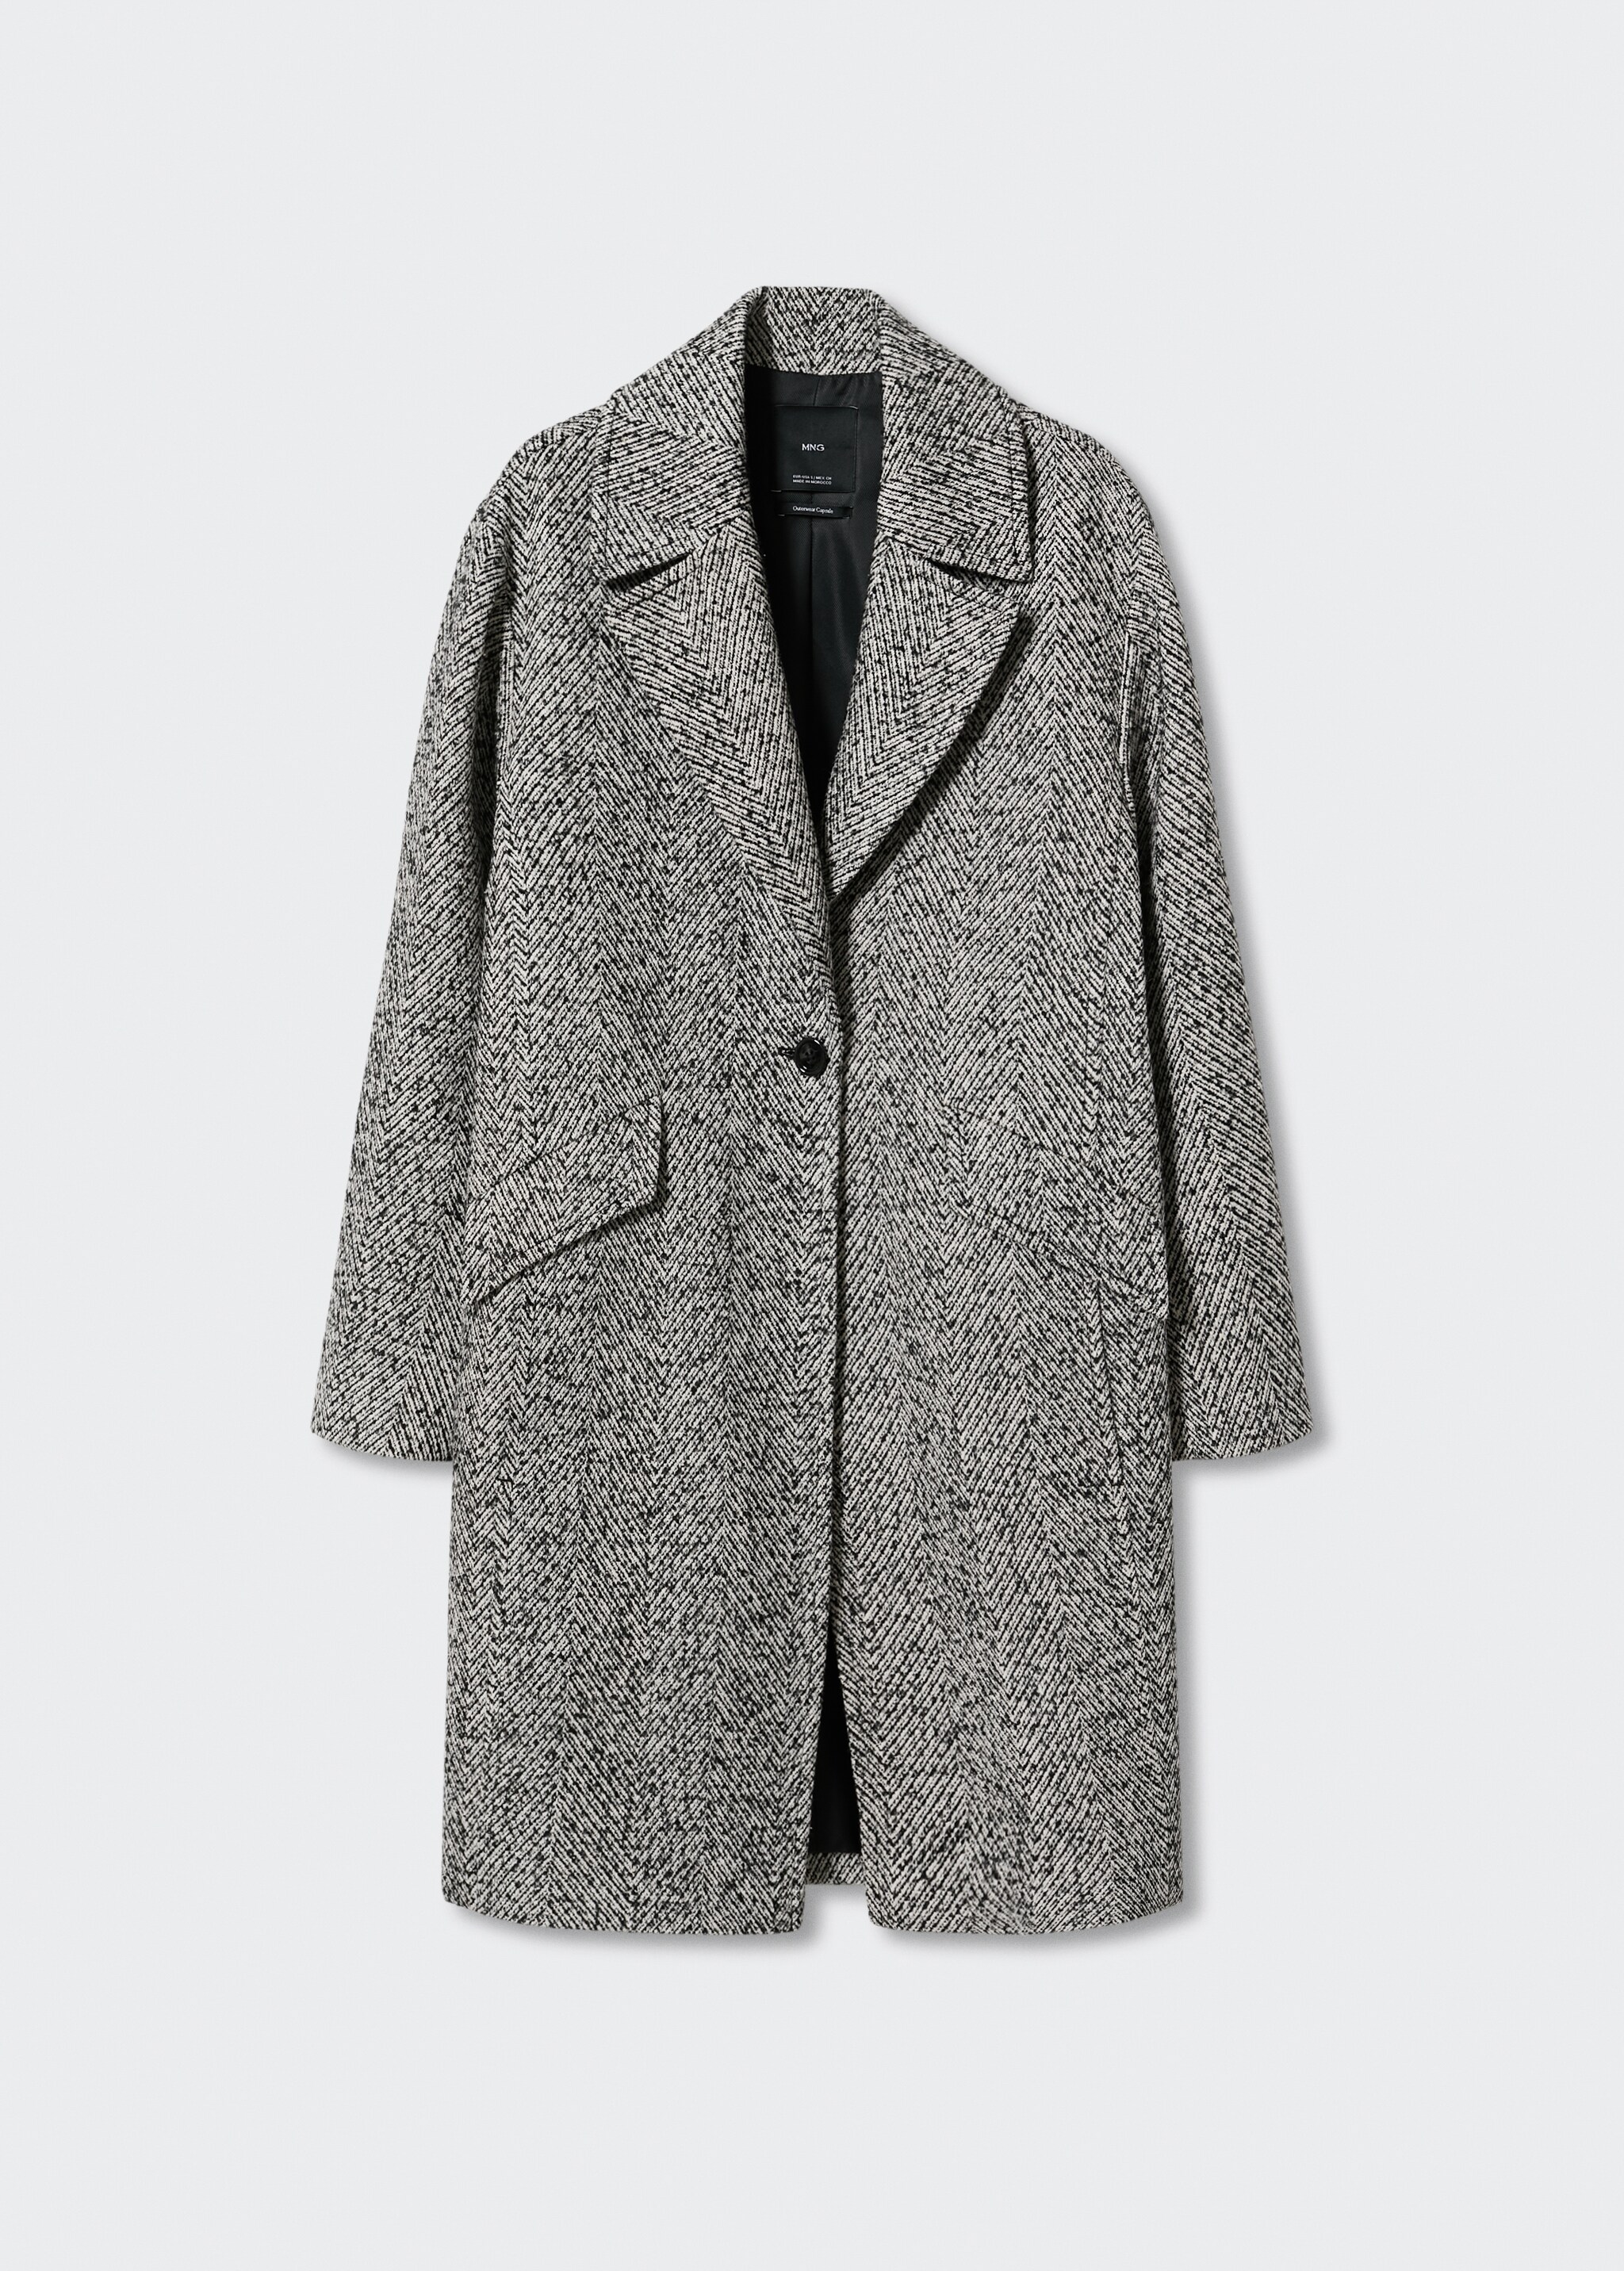 Straight-cut wool coat - Article without model